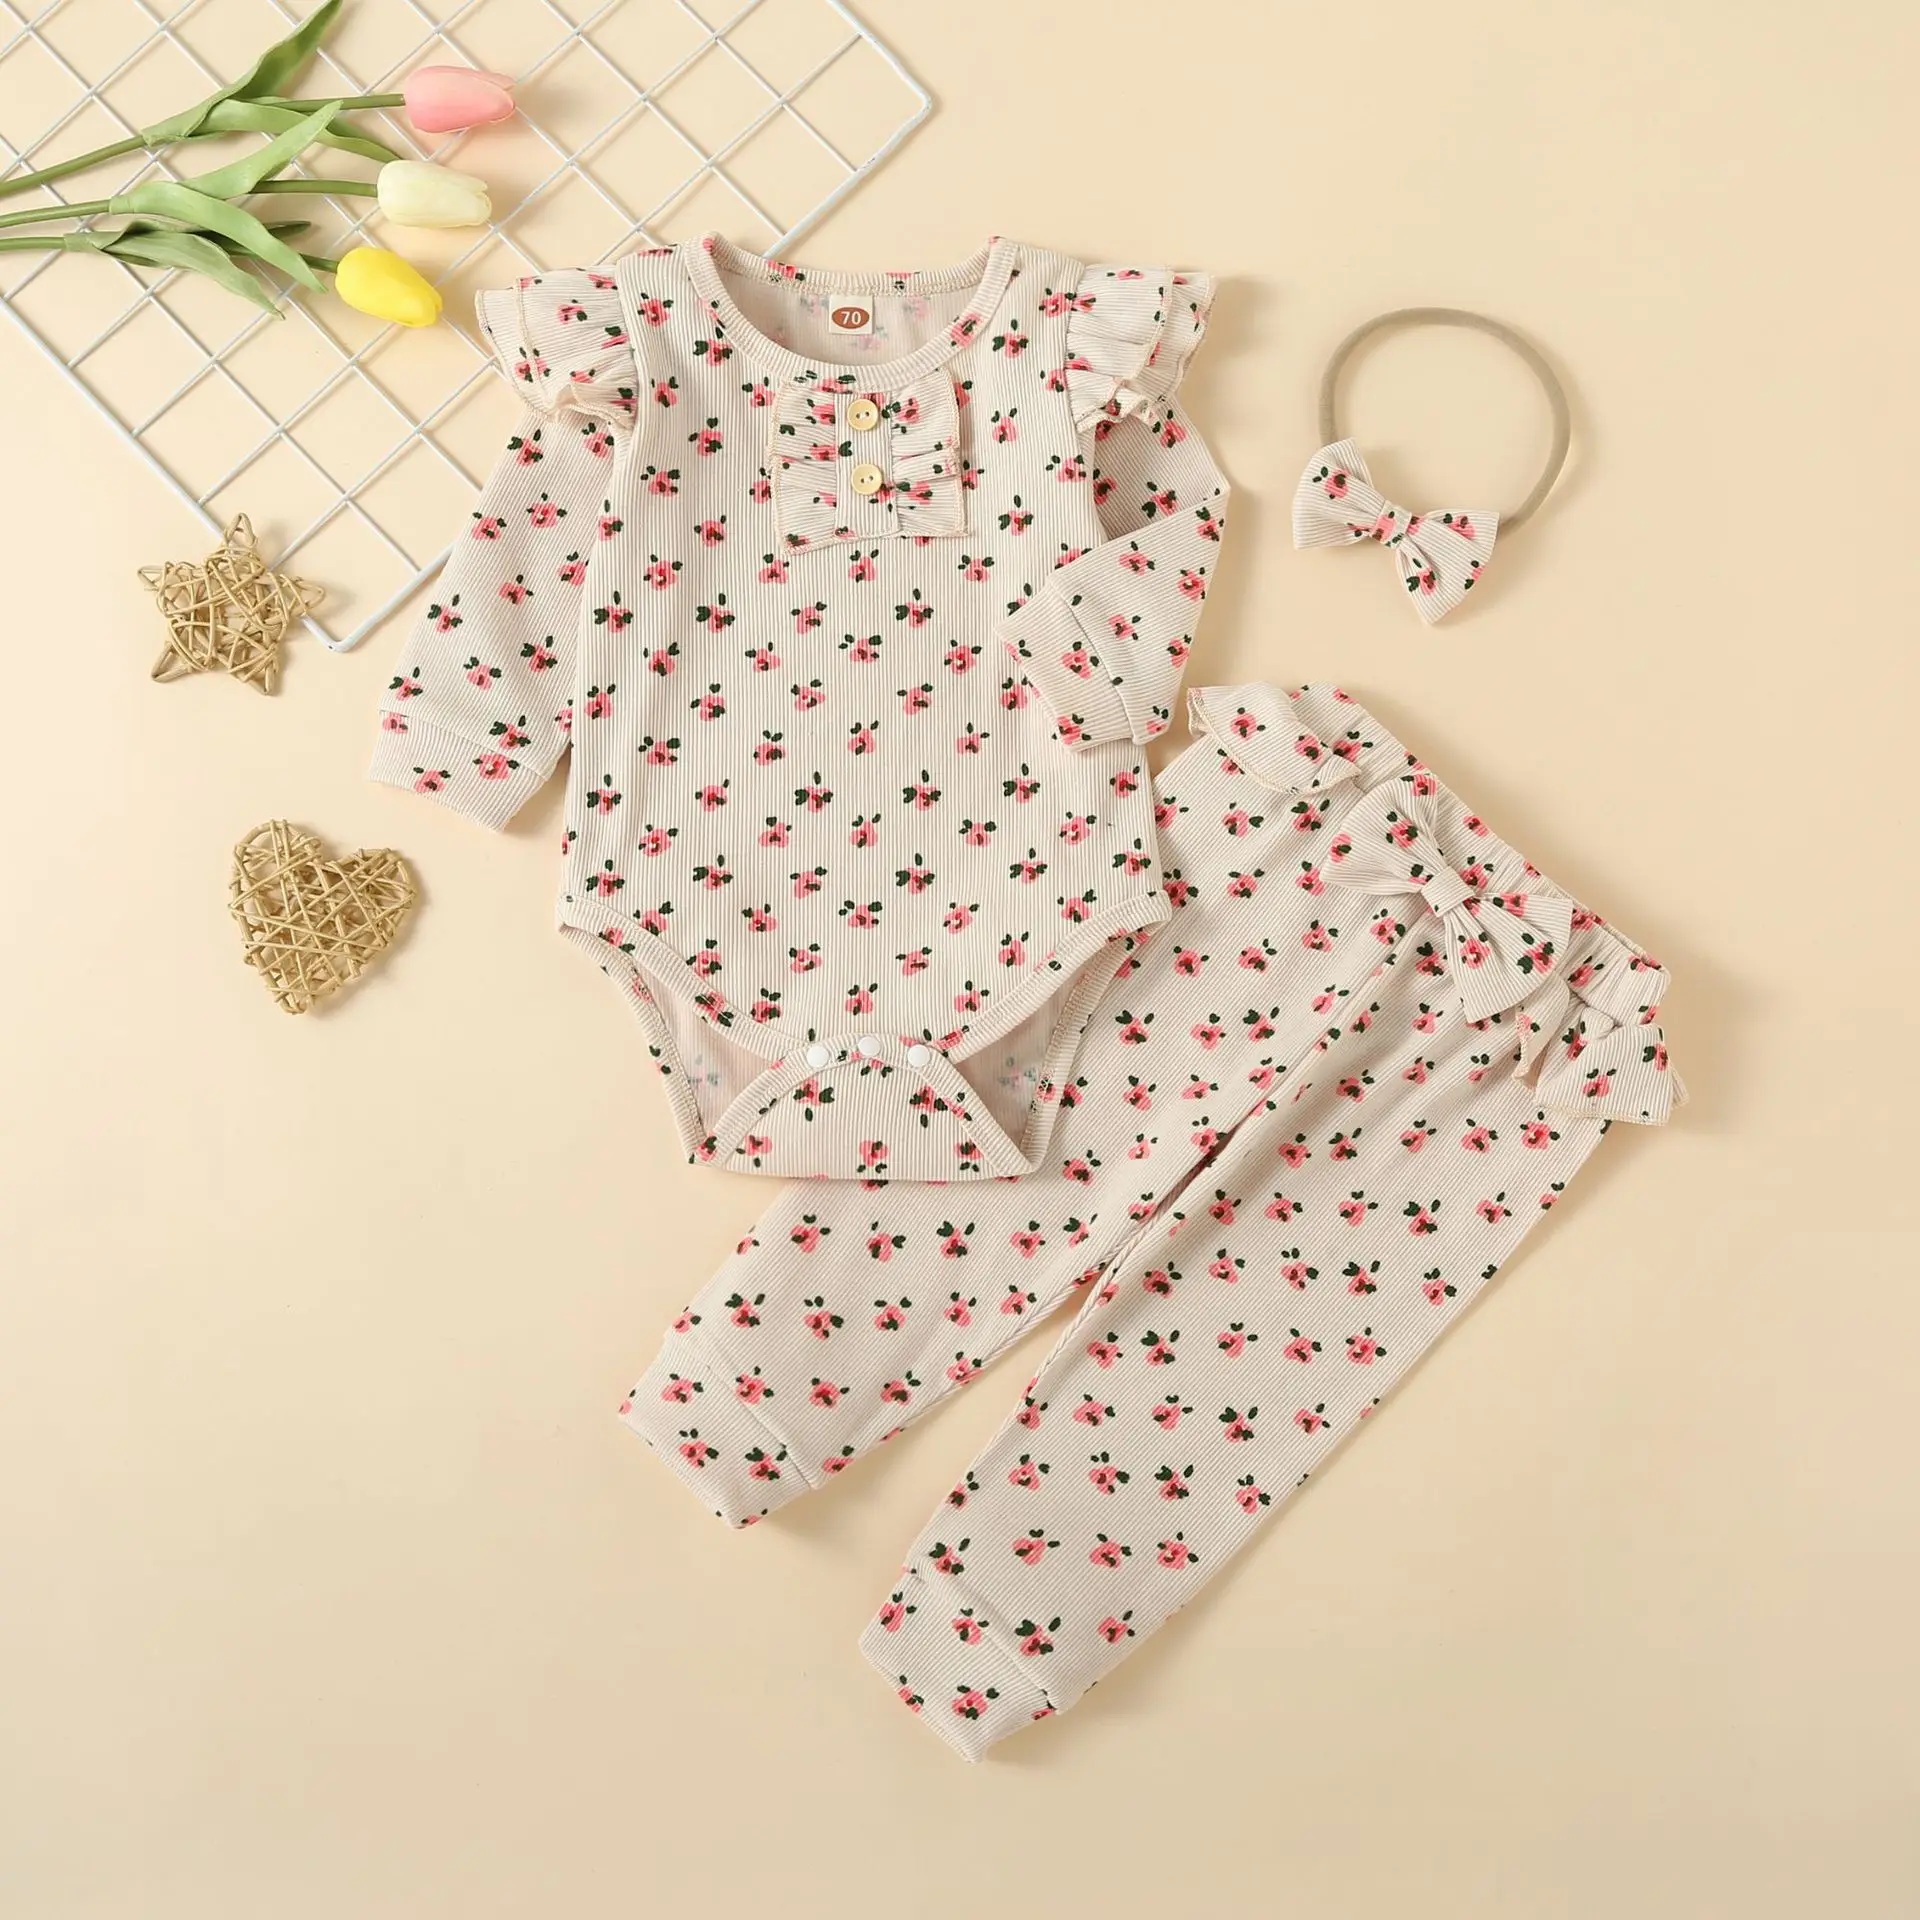 3Pcs Infant Newborn Baby Girl Clothes Sets Spring Autumn Printed Long Sleeved Jumper+Trousers+Headwear For Baby Outfit Set 6-24M